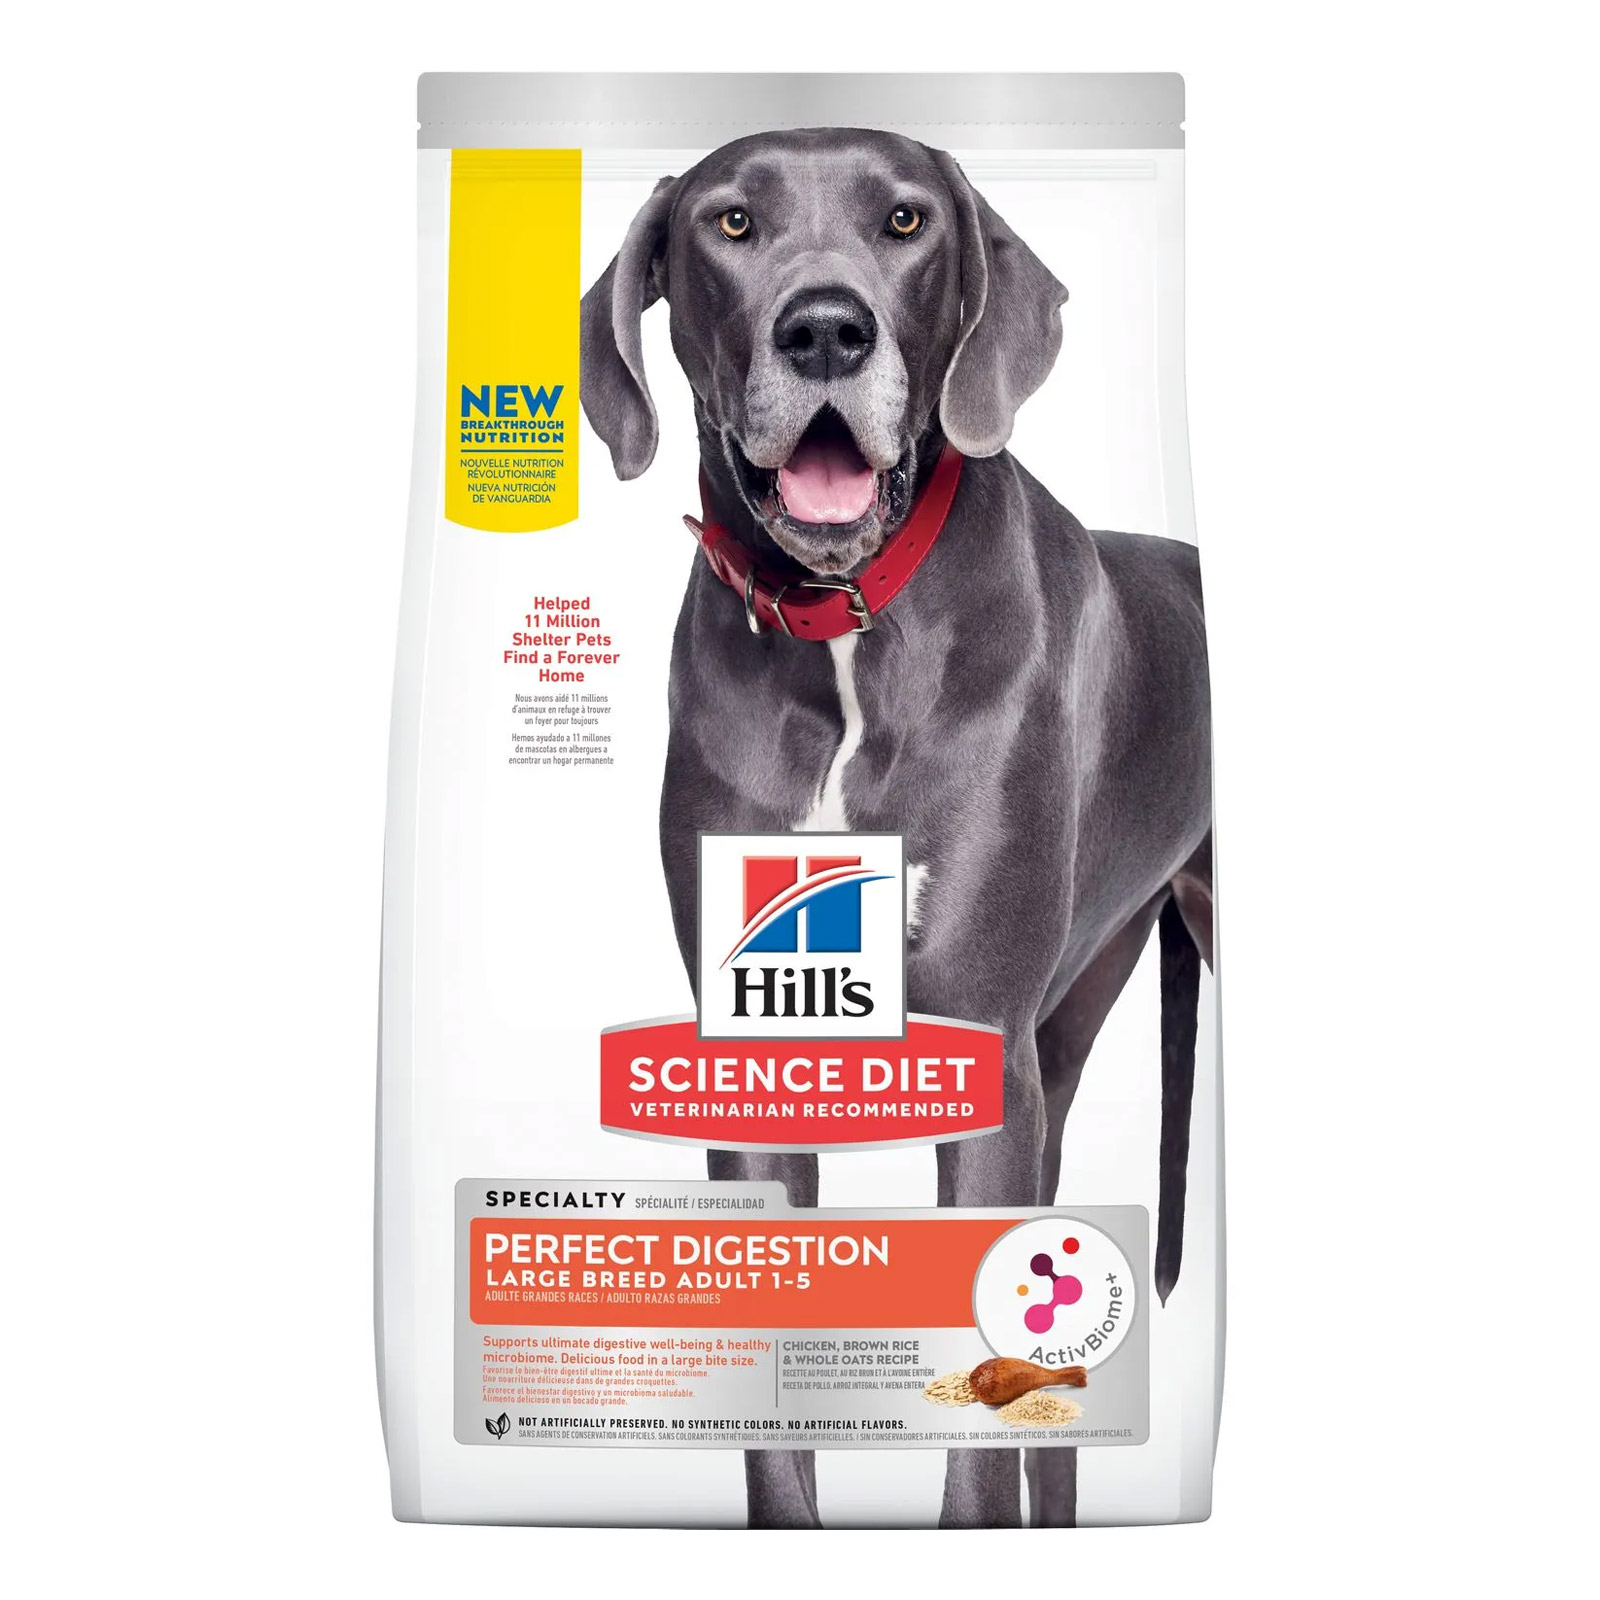 Hill's Science Diet Perfect Digestion Large Breed Dog Food